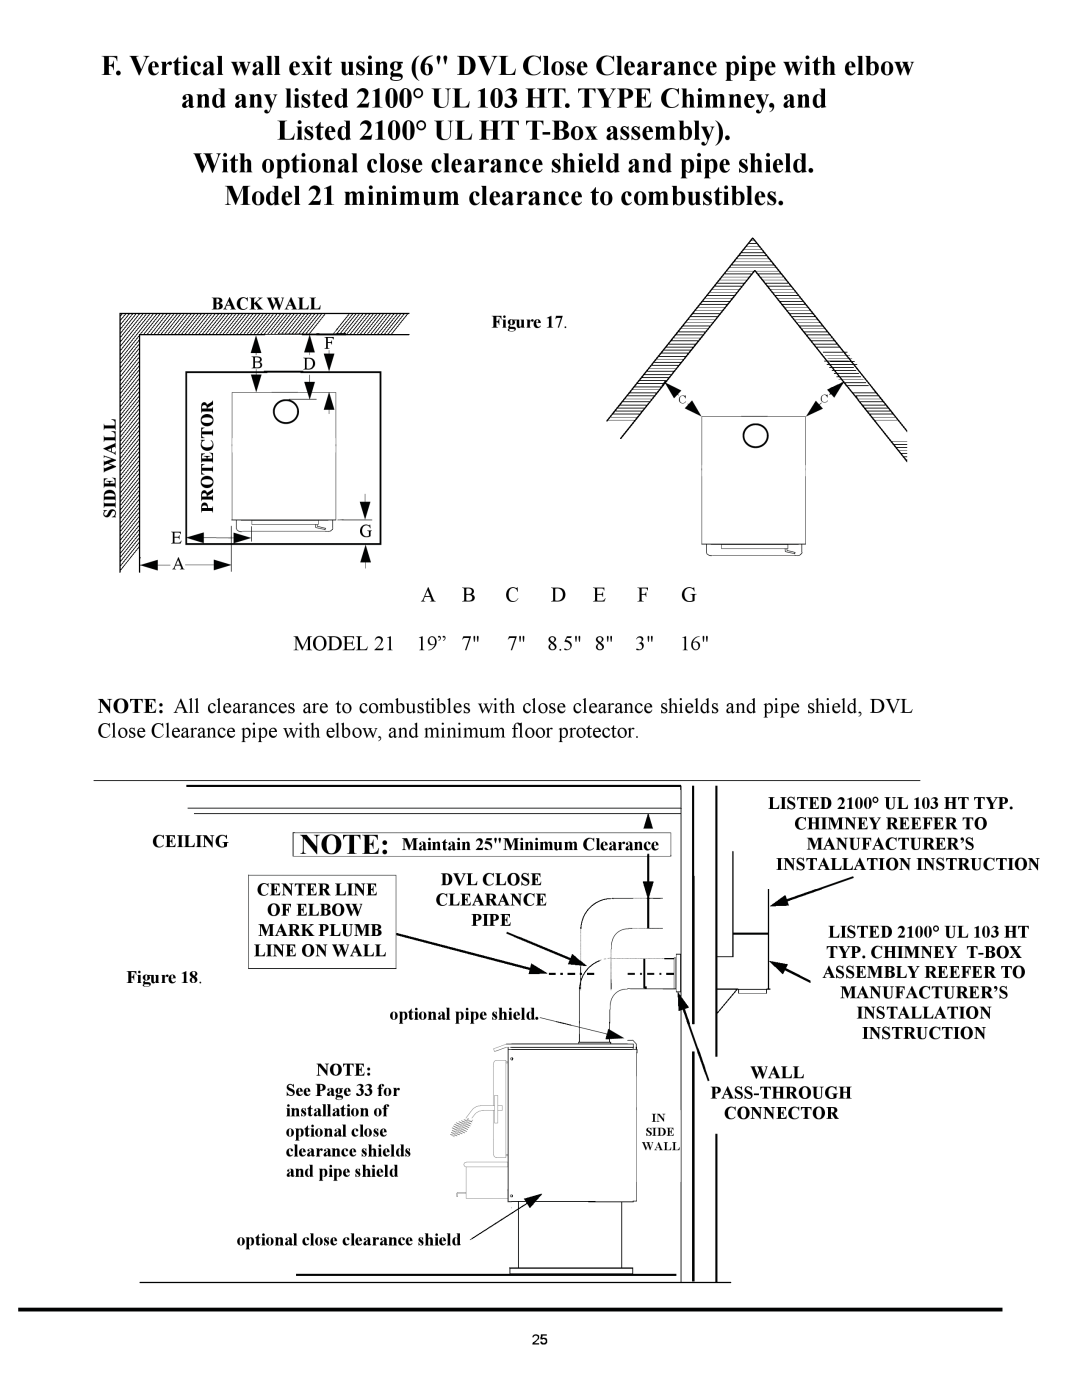 New Buck Corporation installation instructions Listed 2100 UL HT T-Boxassembly 